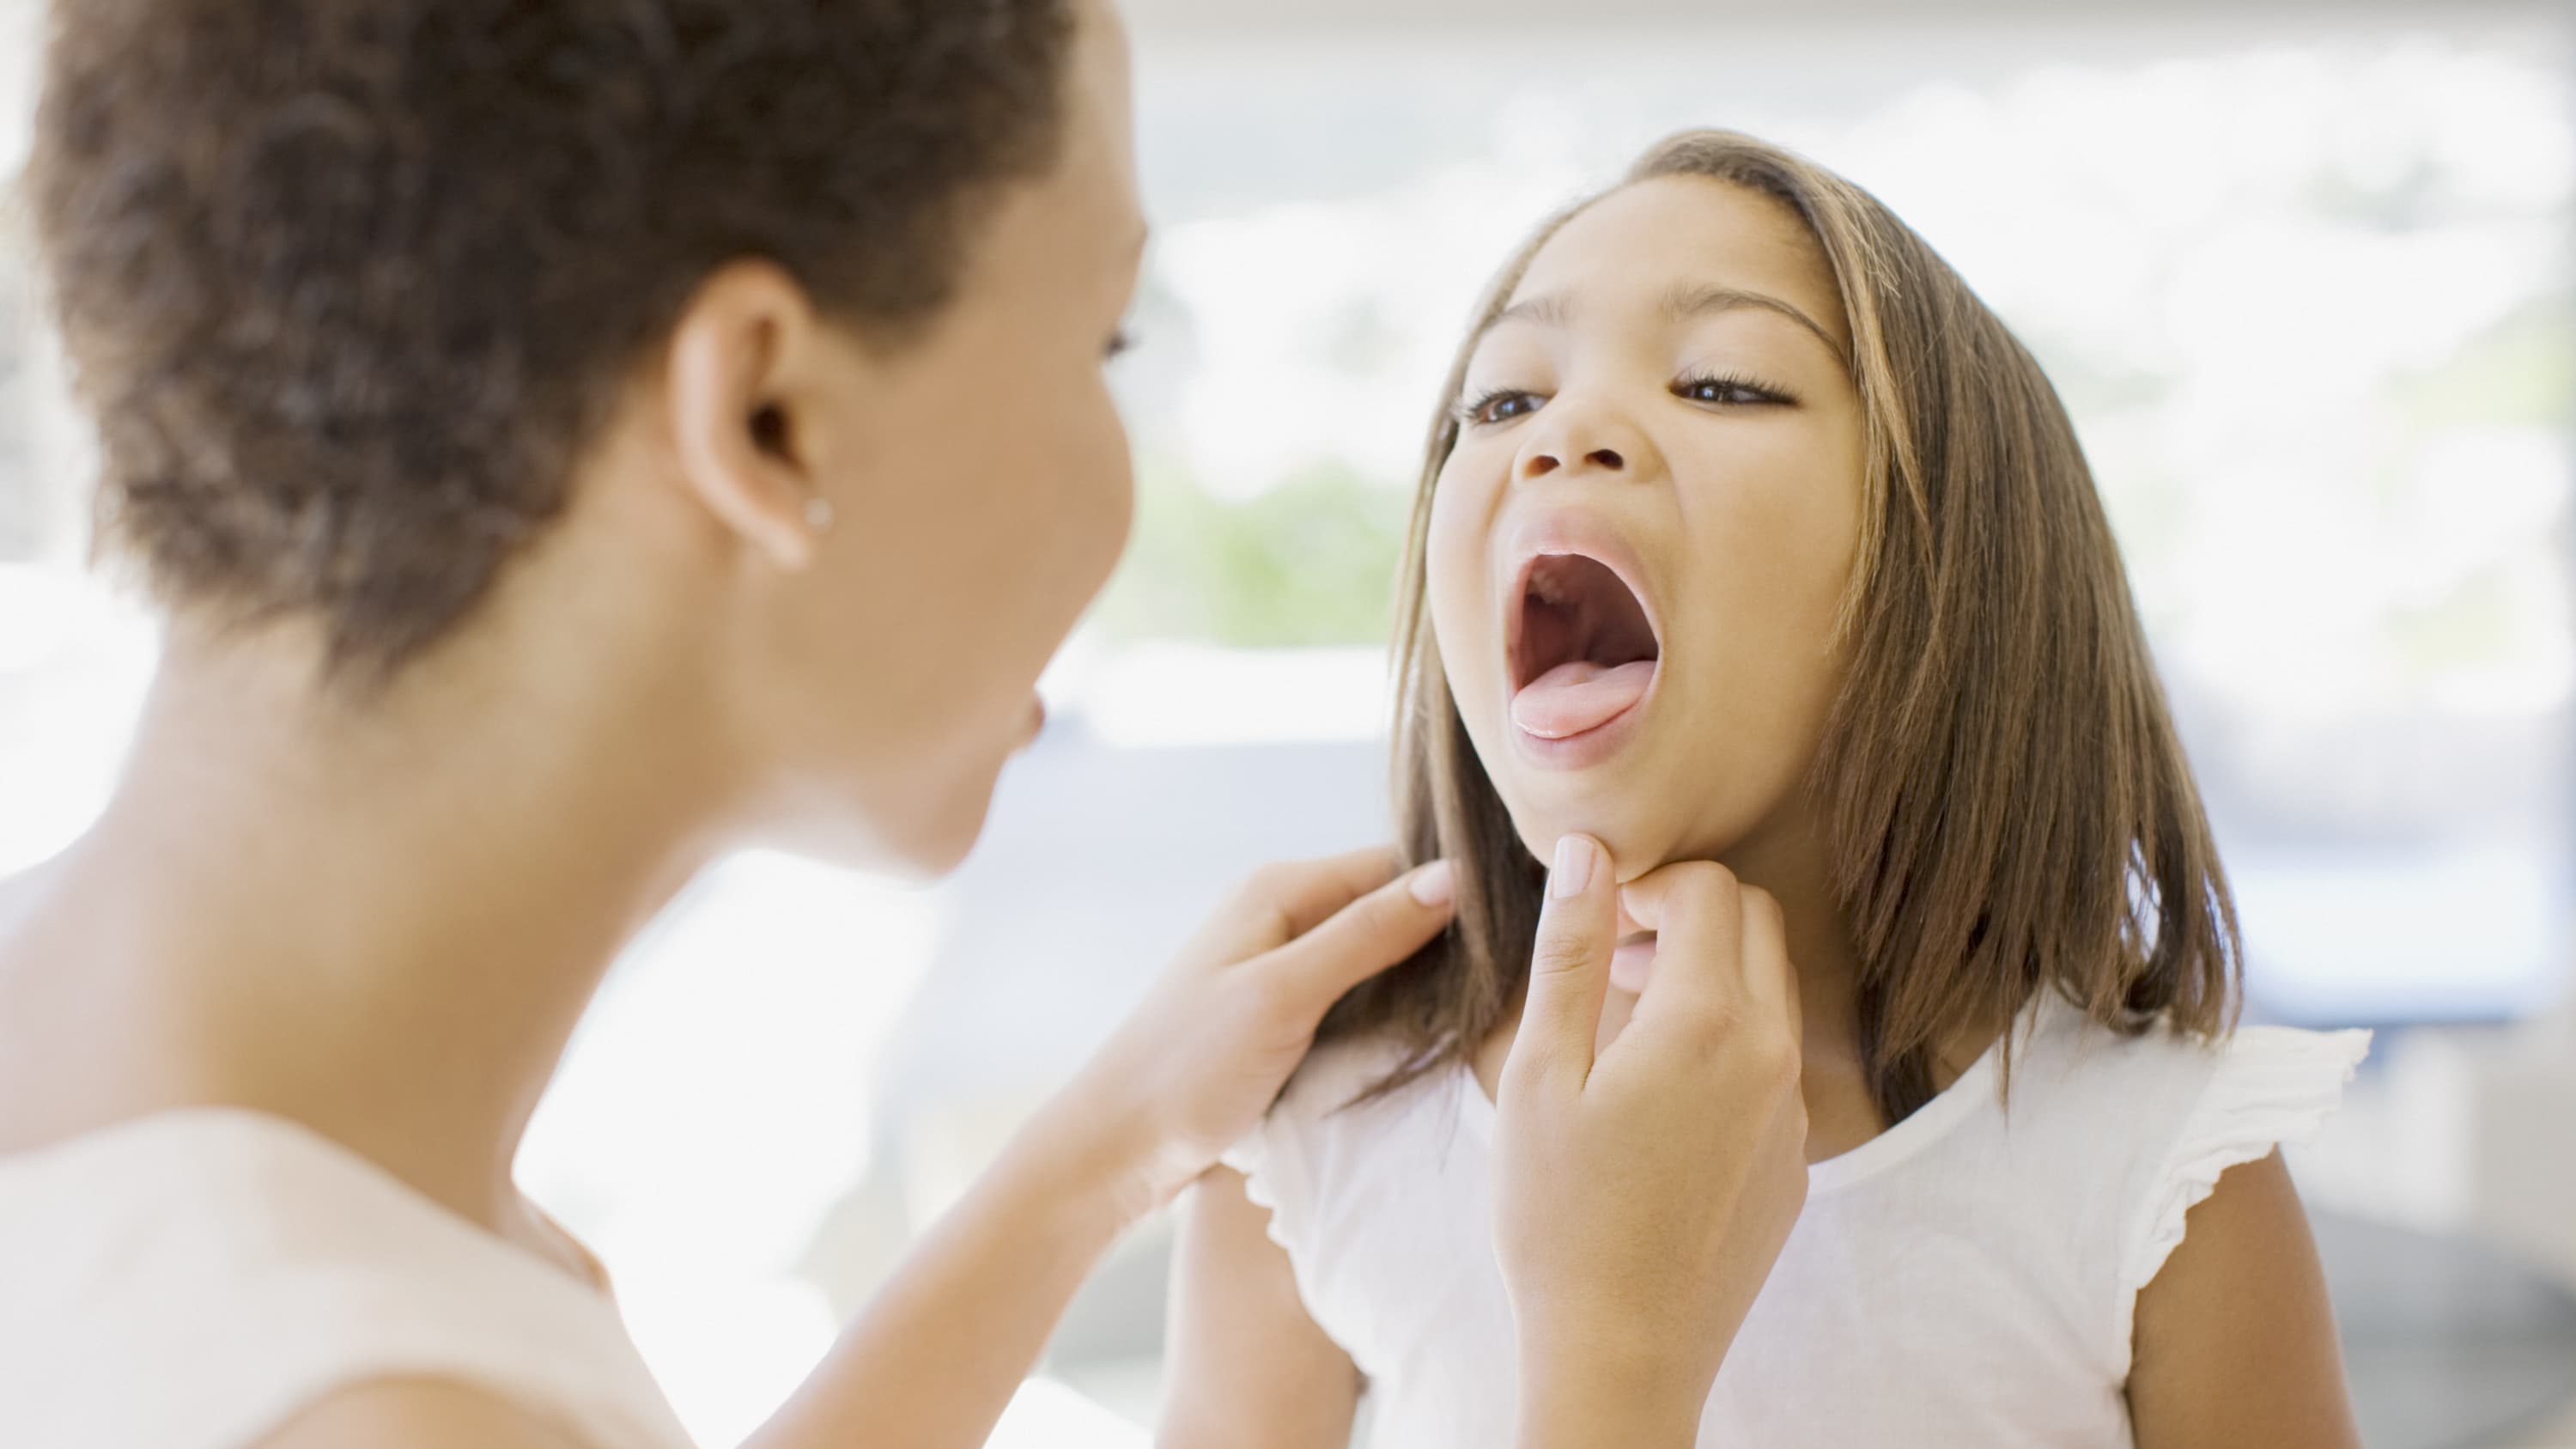 A mother checks her daughter's sore throat before consulting the doctor about a tonsillectomy.